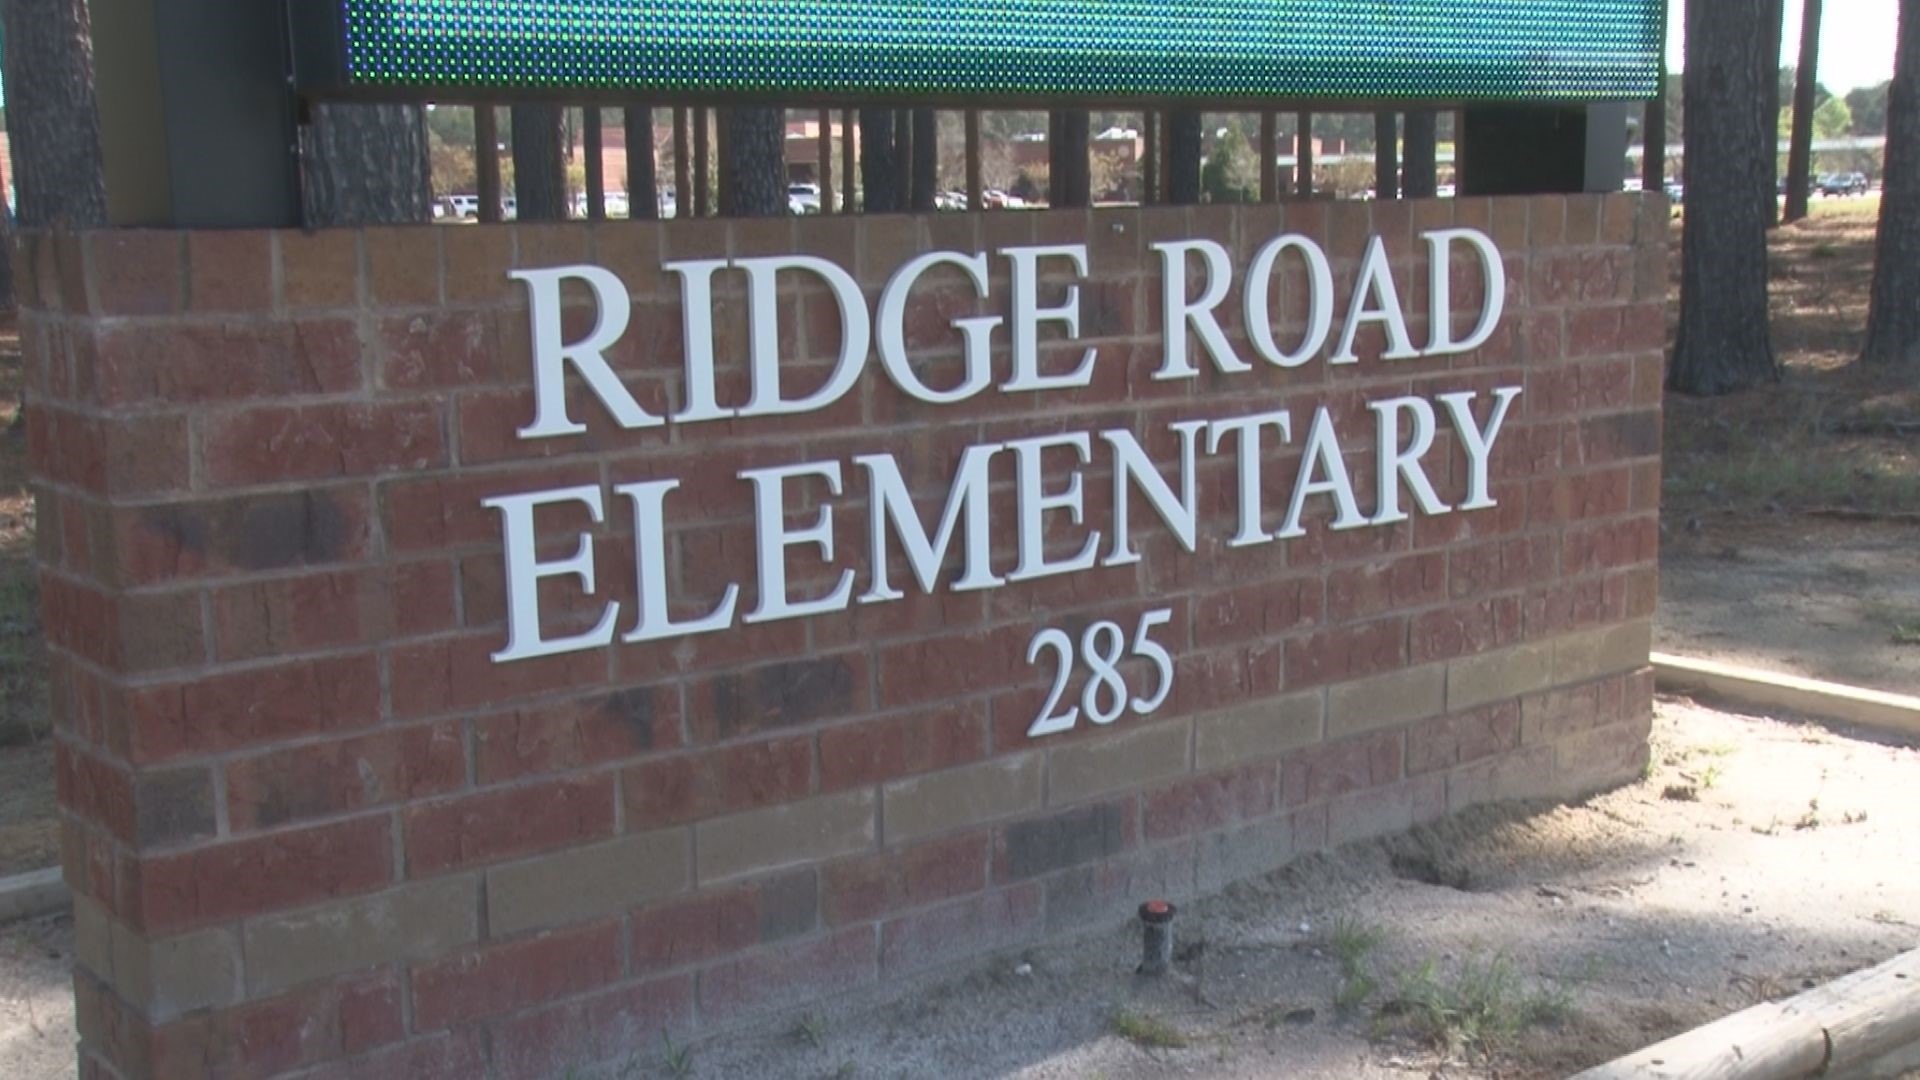 Teachers at Ridge Road Elementary have put in overtime to help their fourth and fifth grade students who fell behind in reading and math